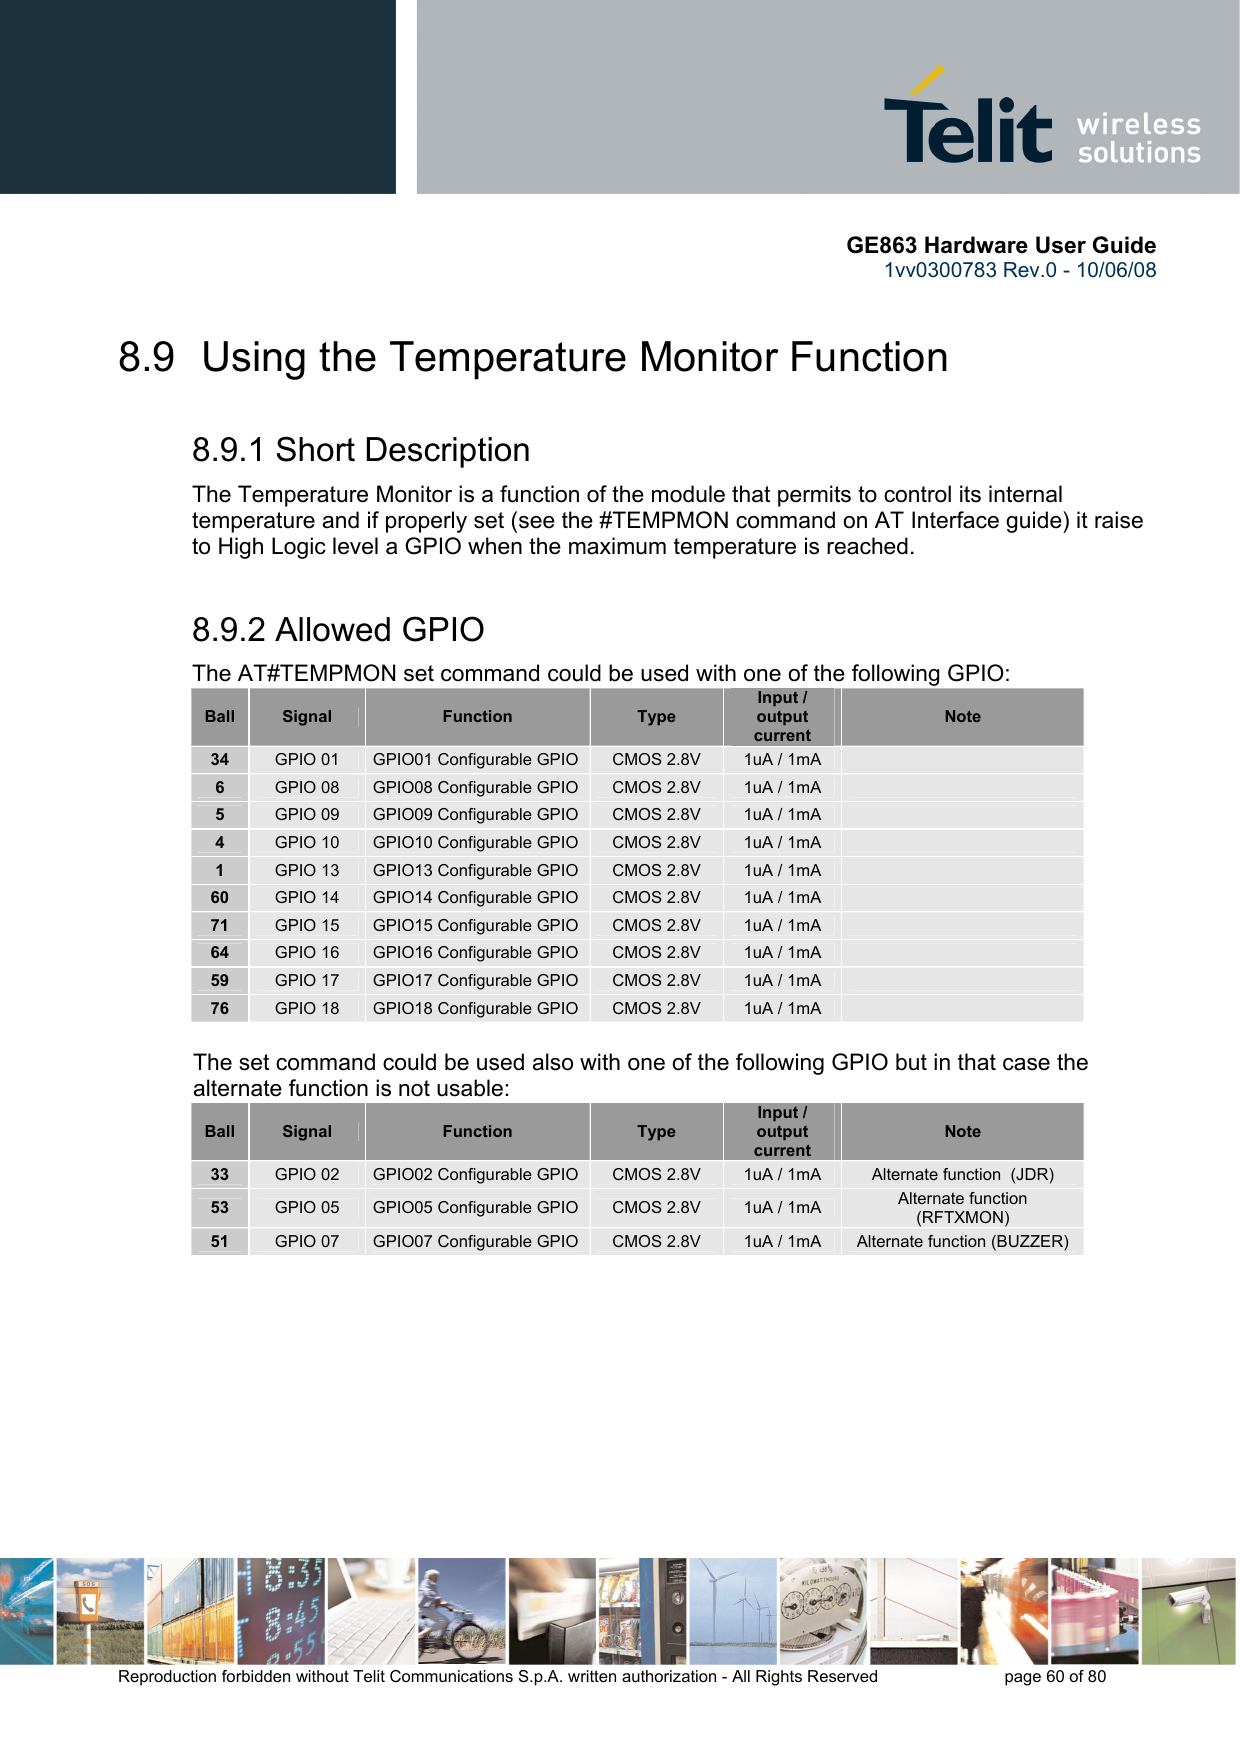       GE863 Hardware User Guide 1vv0300783 Rev.0 - 10/06/08 Reproduction forbidden without Telit Communications S.p.A. written authorization - All Rights Reserved    page 60 of 80  8.9  Using the Temperature Monitor Function 8.9.1 Short Description The Temperature Monitor is a function of the module that permits to control its internal temperature and if properly set (see the #TEMPMON command on AT Interface guide) it raise to High Logic level a GPIO when the maximum temperature is reached. 8.9.2 Allowed GPIO  The AT#TEMPMON set command could be used with one of the following GPIO: Ball  Signal  Function  Type Input / output current Note 34  GPIO 01  GPIO01 Configurable GPIO  CMOS 2.8V  1uA / 1mA   6  GPIO 08  GPIO08 Configurable GPIO  CMOS 2.8V  1uA / 1mA   5  GPIO 09  GPIO09 Configurable GPIO  CMOS 2.8V  1uA / 1mA   4  GPIO 10  GPIO10 Configurable GPIO  CMOS 2.8V  1uA / 1mA   1  GPIO 13  GPIO13 Configurable GPIO  CMOS 2.8V  1uA / 1mA   60  GPIO 14  GPIO14 Configurable GPIO  CMOS 2.8V  1uA / 1mA   71  GPIO 15  GPIO15 Configurable GPIO  CMOS 2.8V  1uA / 1mA   64  GPIO 16  GPIO16 Configurable GPIO  CMOS 2.8V  1uA / 1mA   59  GPIO 17  GPIO17 Configurable GPIO  CMOS 2.8V  1uA / 1mA   76  GPIO 18  GPIO18 Configurable GPIO  CMOS 2.8V  1uA / 1mA    The set command could be used also with one of the following GPIO but in that case the alternate function is not usable: Ball  Signal  Function  Type Input / output current Note 33  GPIO 02  GPIO02 Configurable GPIO  CMOS 2.8V  1uA / 1mA  Alternate function  (JDR) 53  GPIO 05  GPIO05 Configurable GPIO  CMOS 2.8V  1uA / 1mA  Alternate function (RFTXMON) 51  GPIO 07  GPIO07 Configurable GPIO  CMOS 2.8V  1uA / 1mA  Alternate function (BUZZER)  